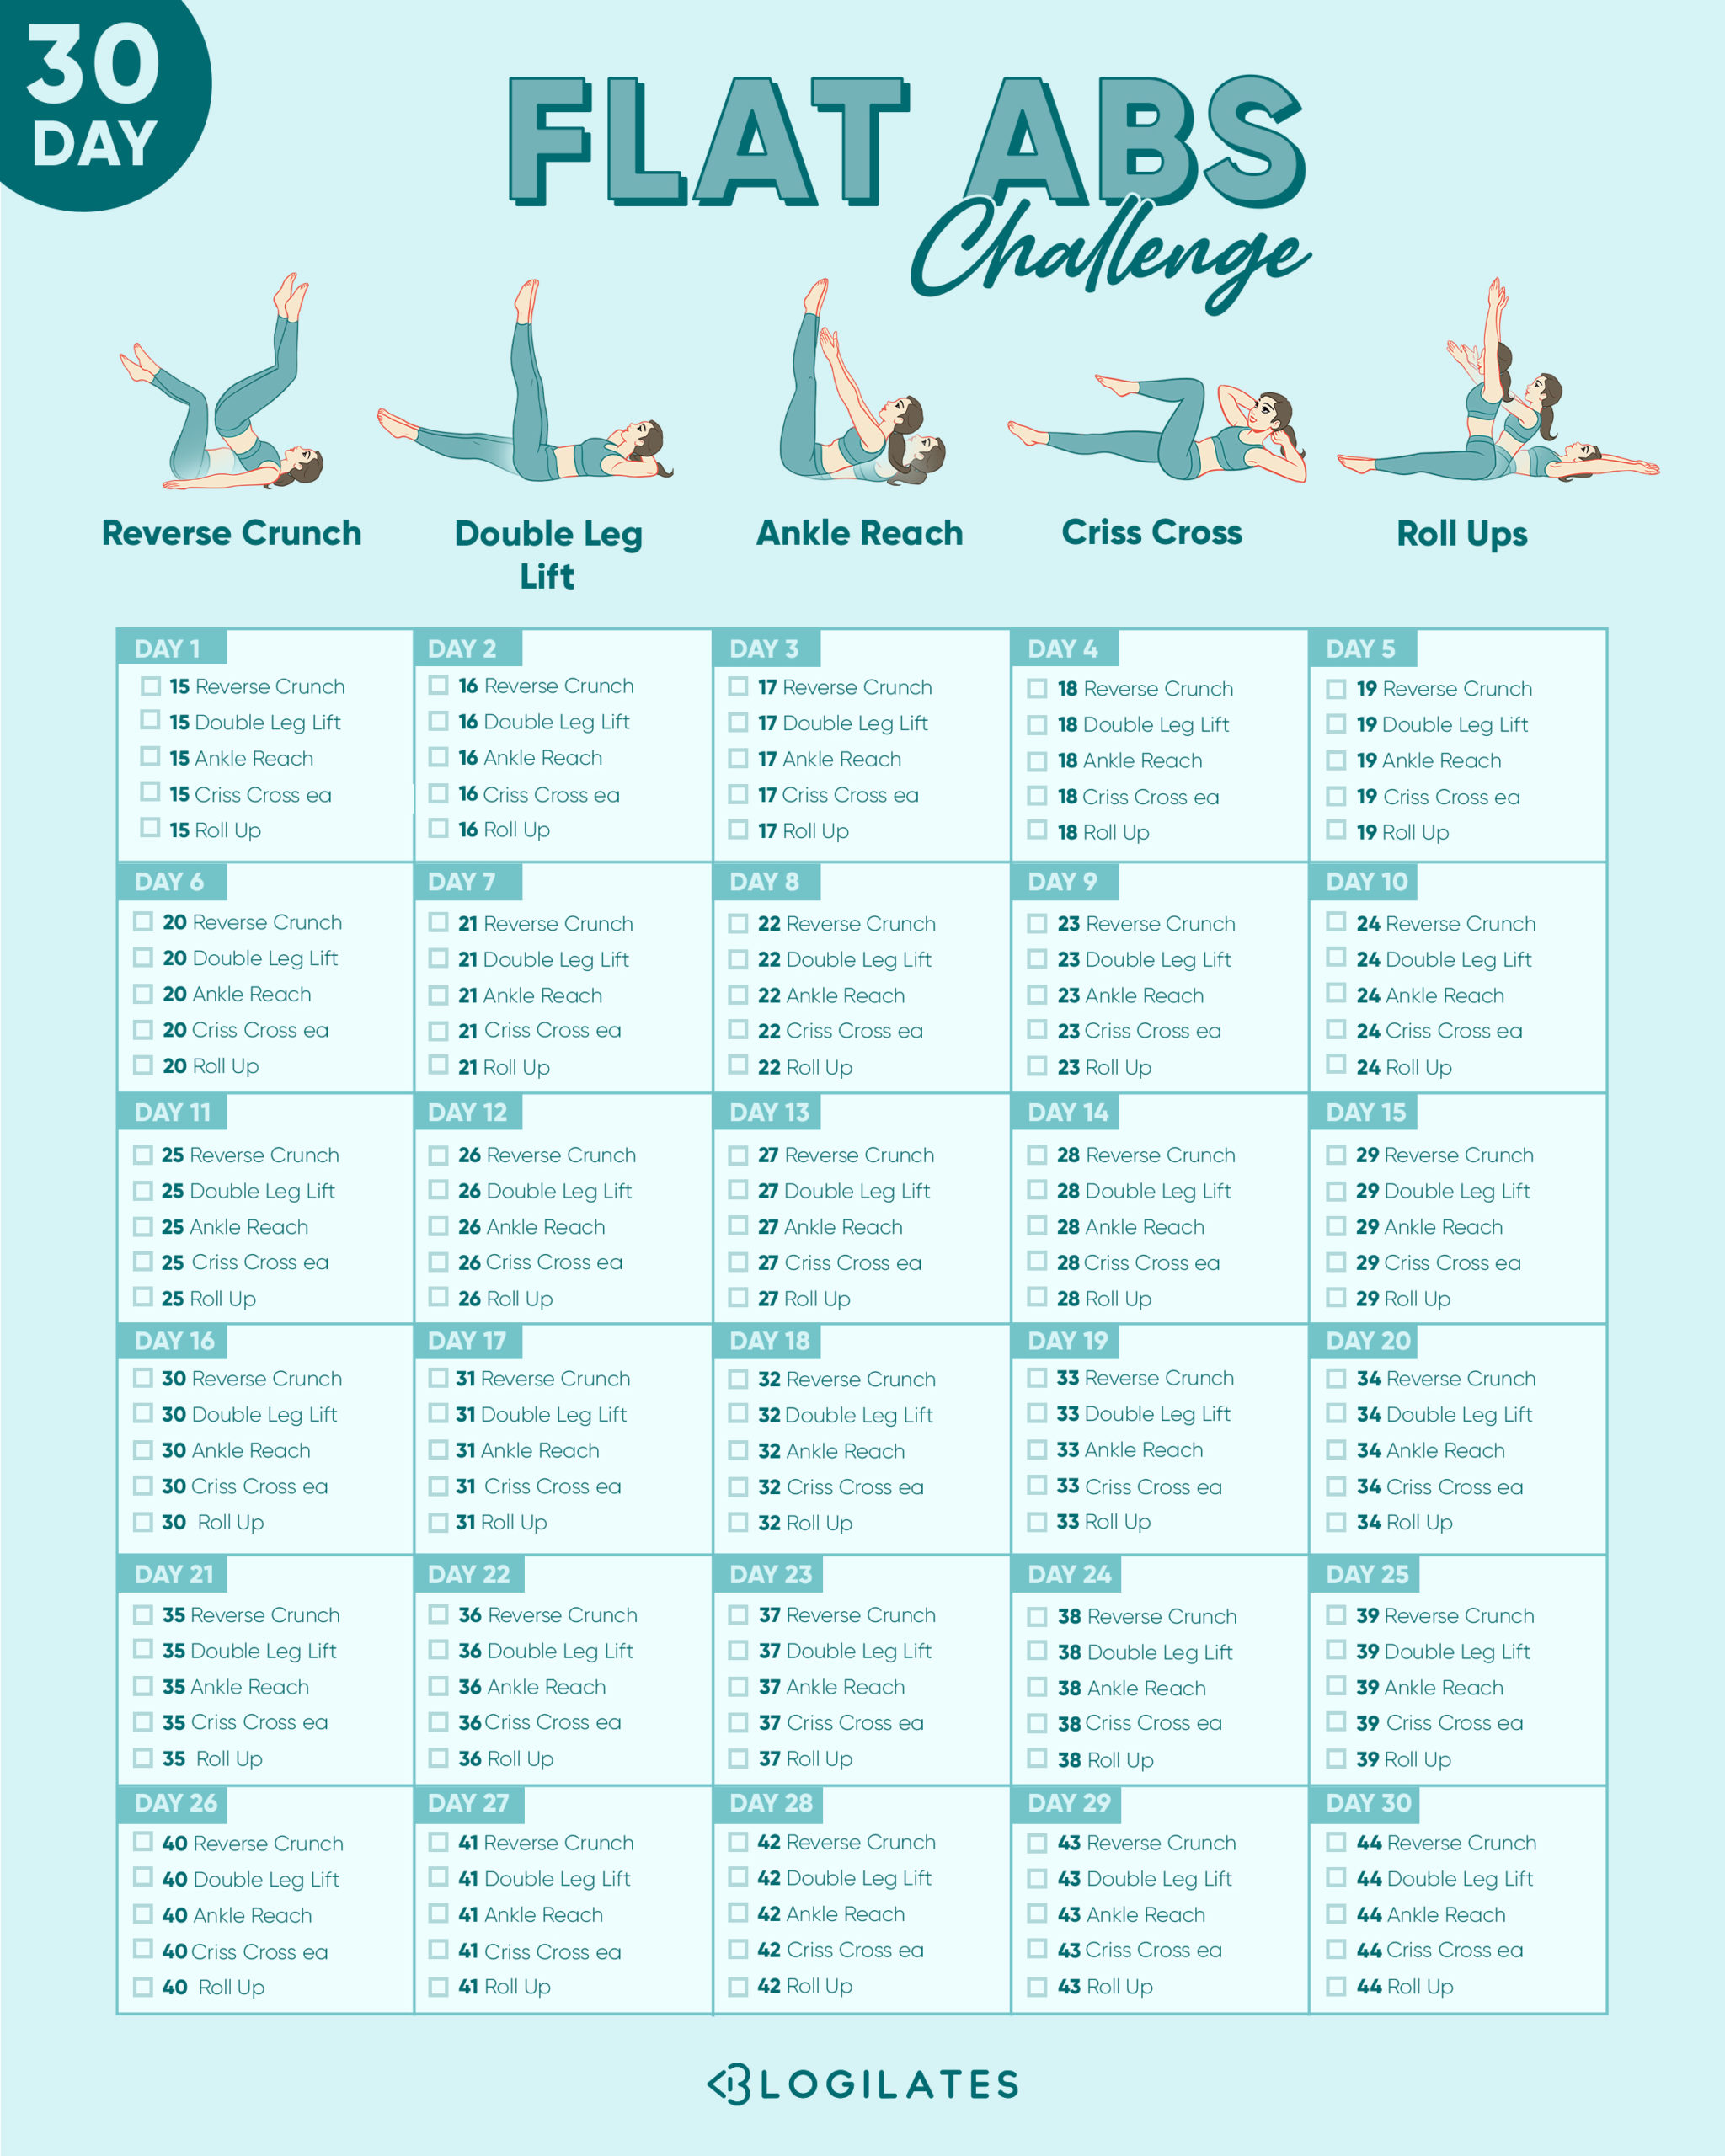 21-Day Ab-Tastic Challenge: Strengthen Your Core & Confidence